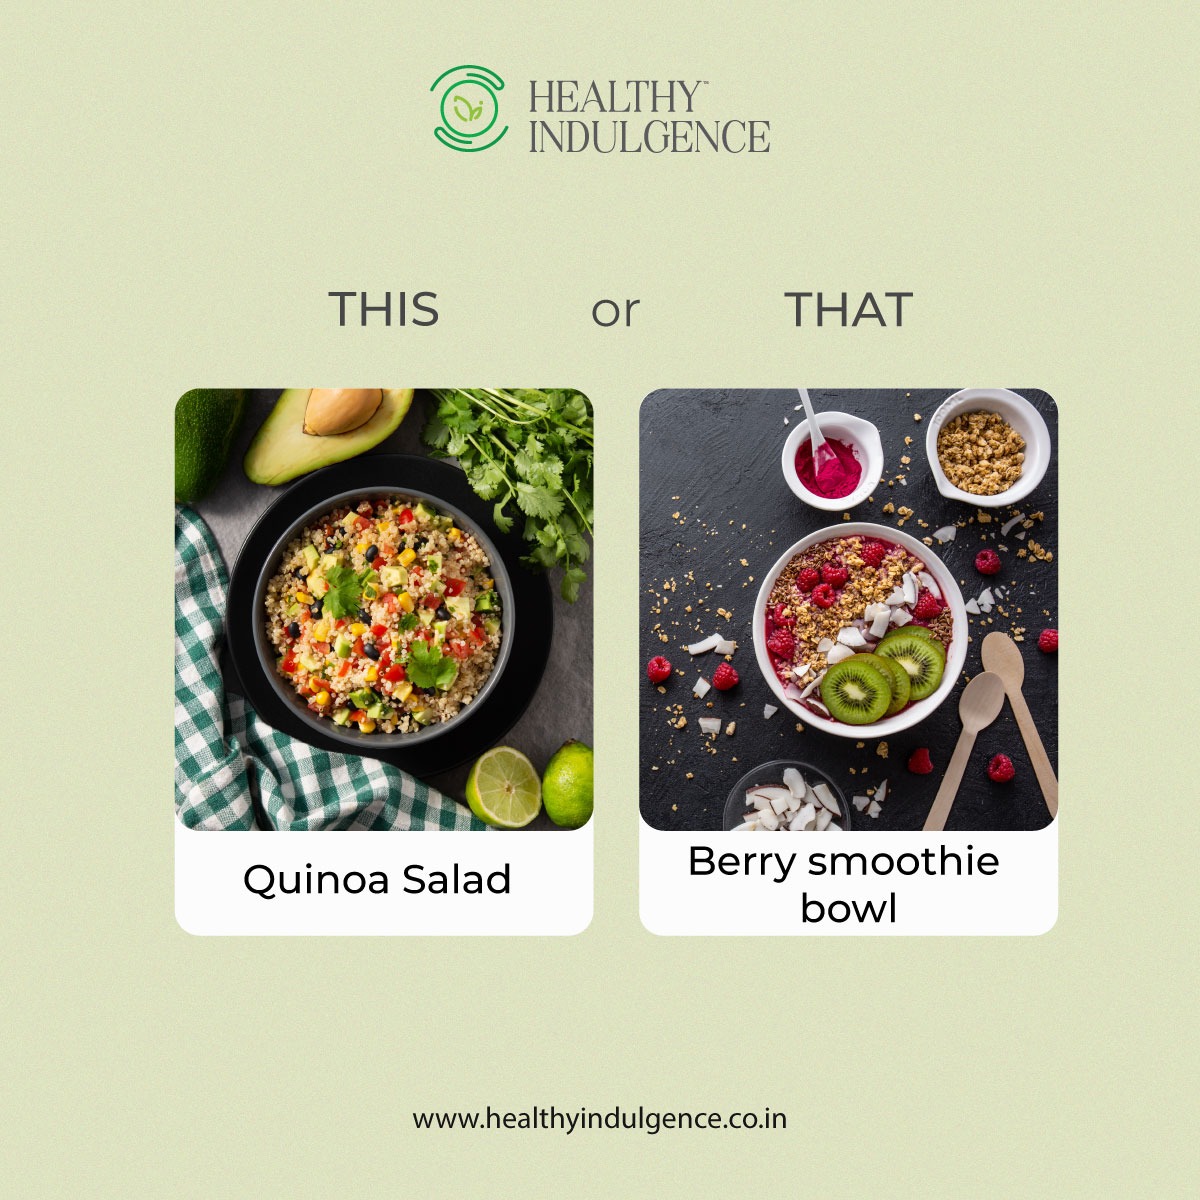 Can't decide between a refreshing Quinoa Salad or a delightful Berry Smoothie Bowl? We want to hear your thoughts!

#quinoasalad #berrysmoothiebowl #tastychoices #healthydelights #fooddecisions #healthyeating #nutritiousmeals #foodoptions #healthyindulgence #ahmedabad